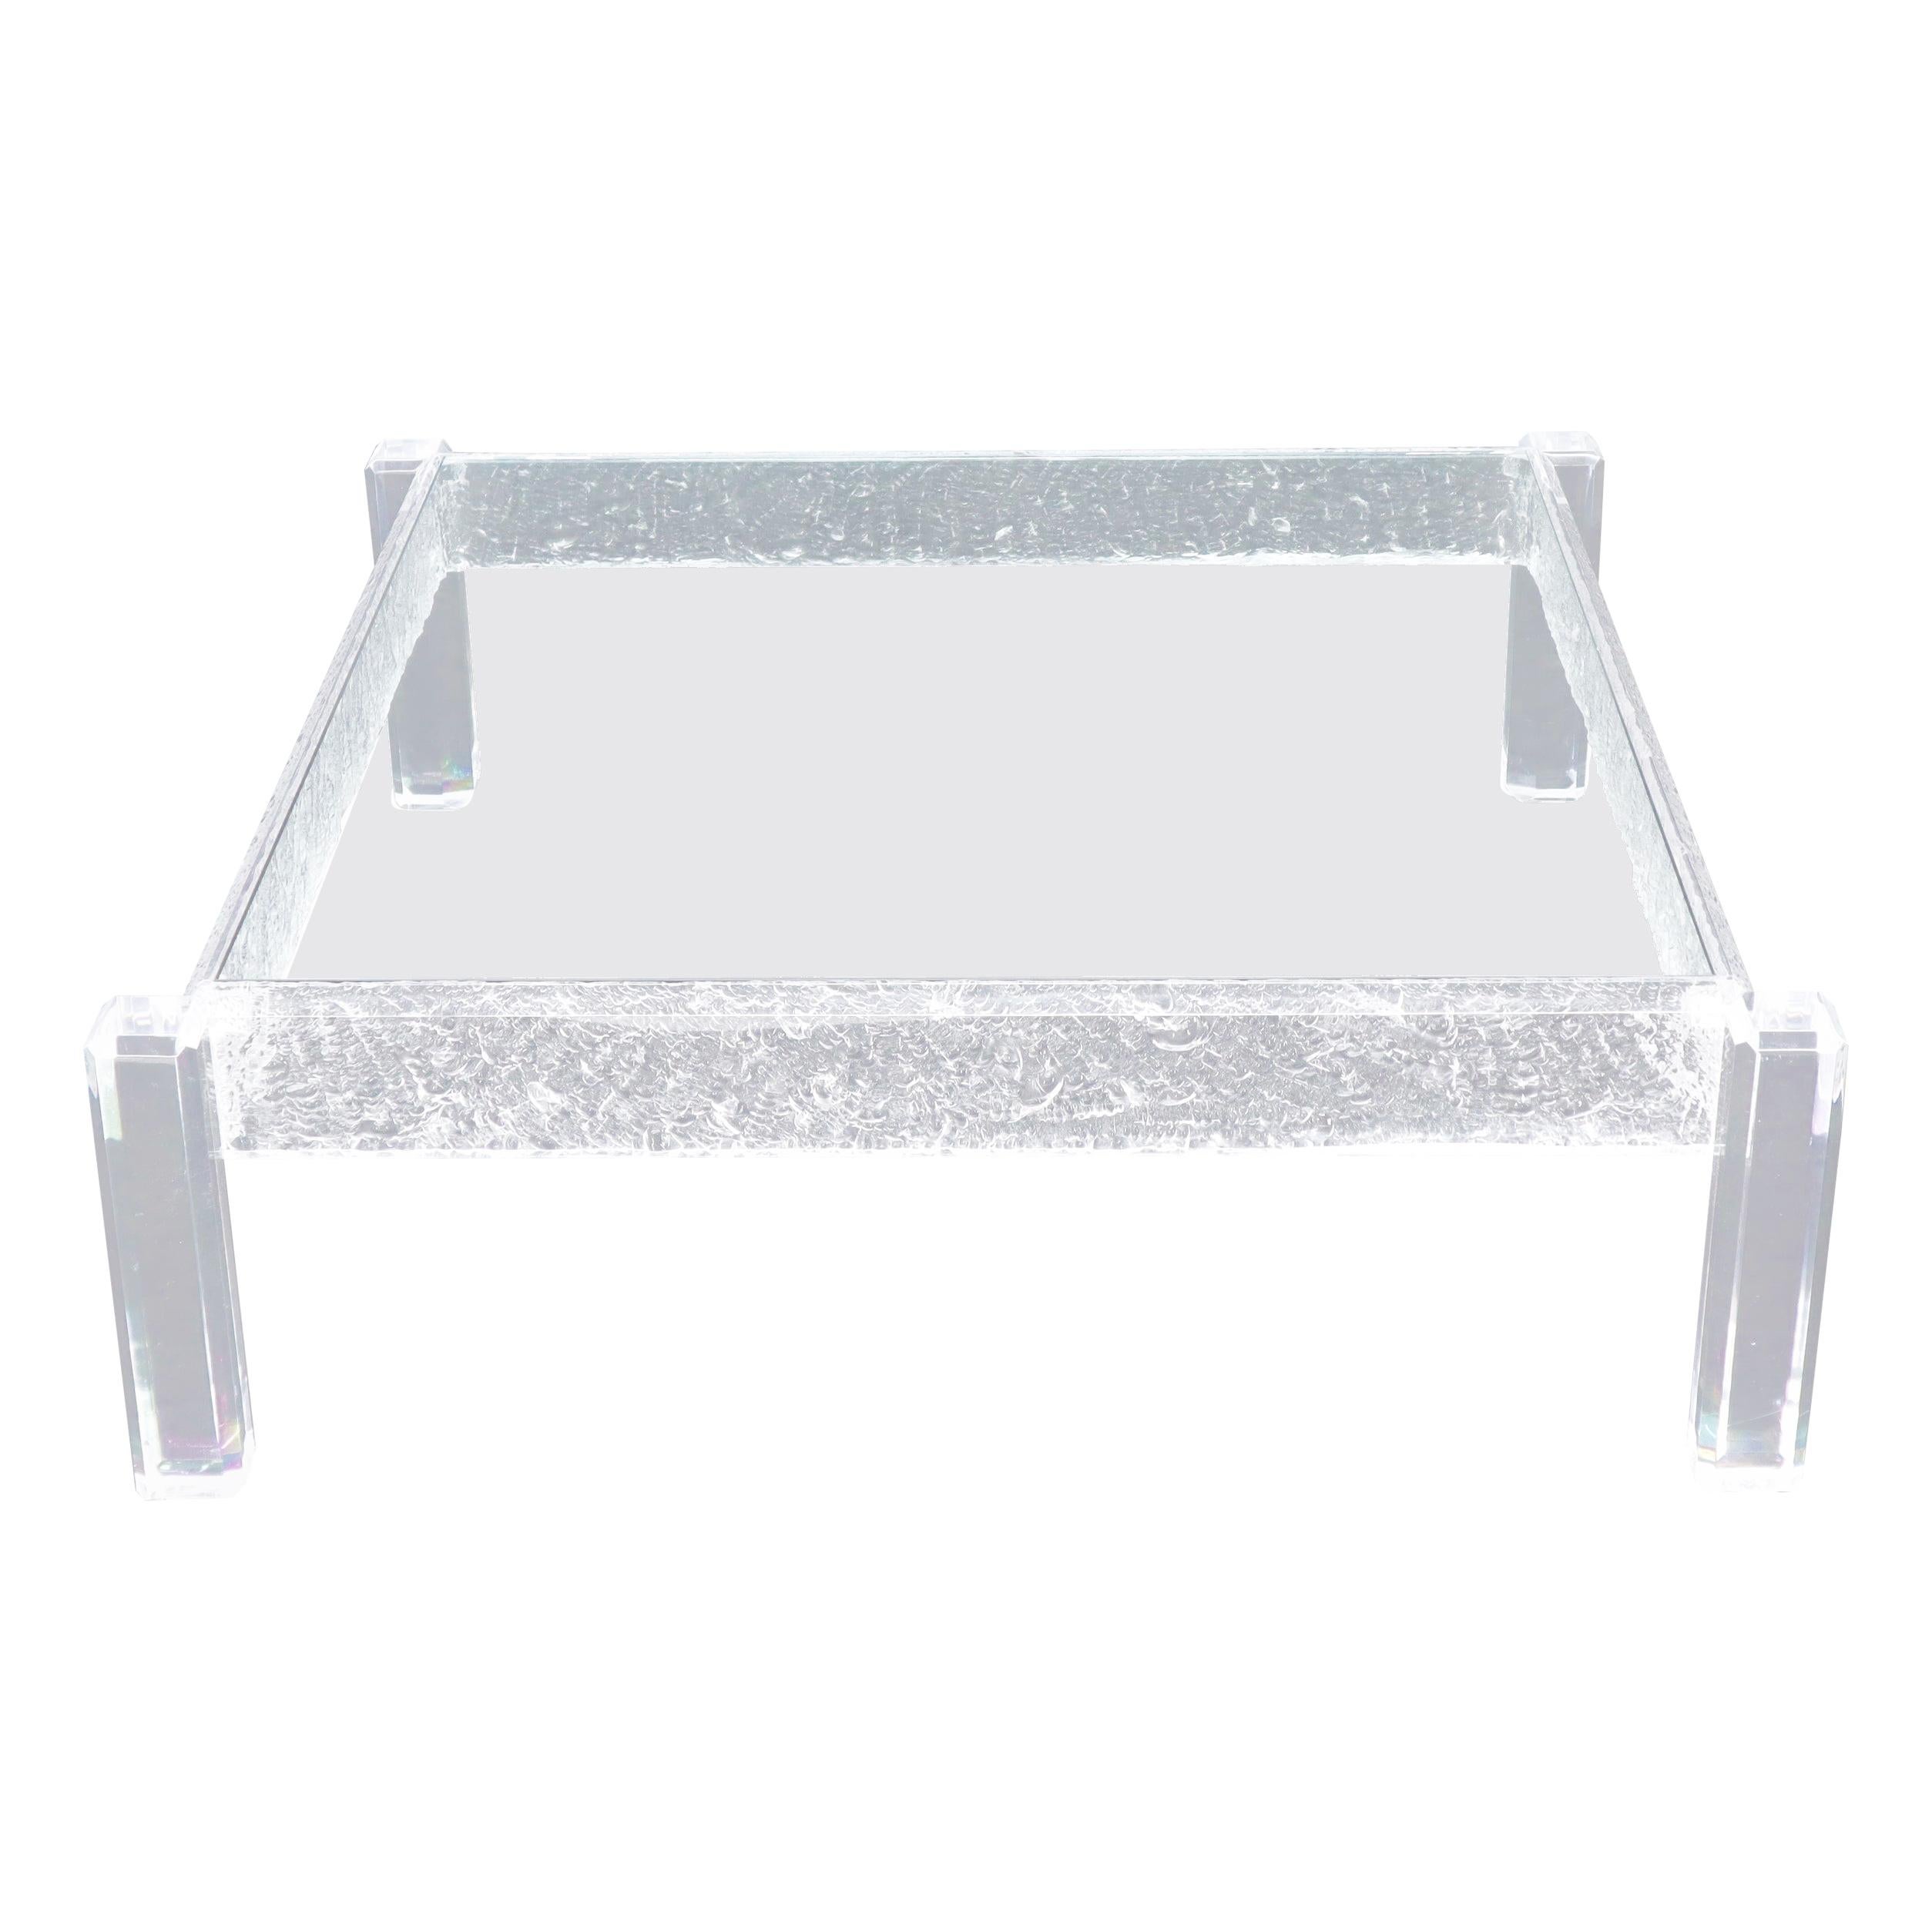 Large Square Carved Lucite Glass Top Coffee Table